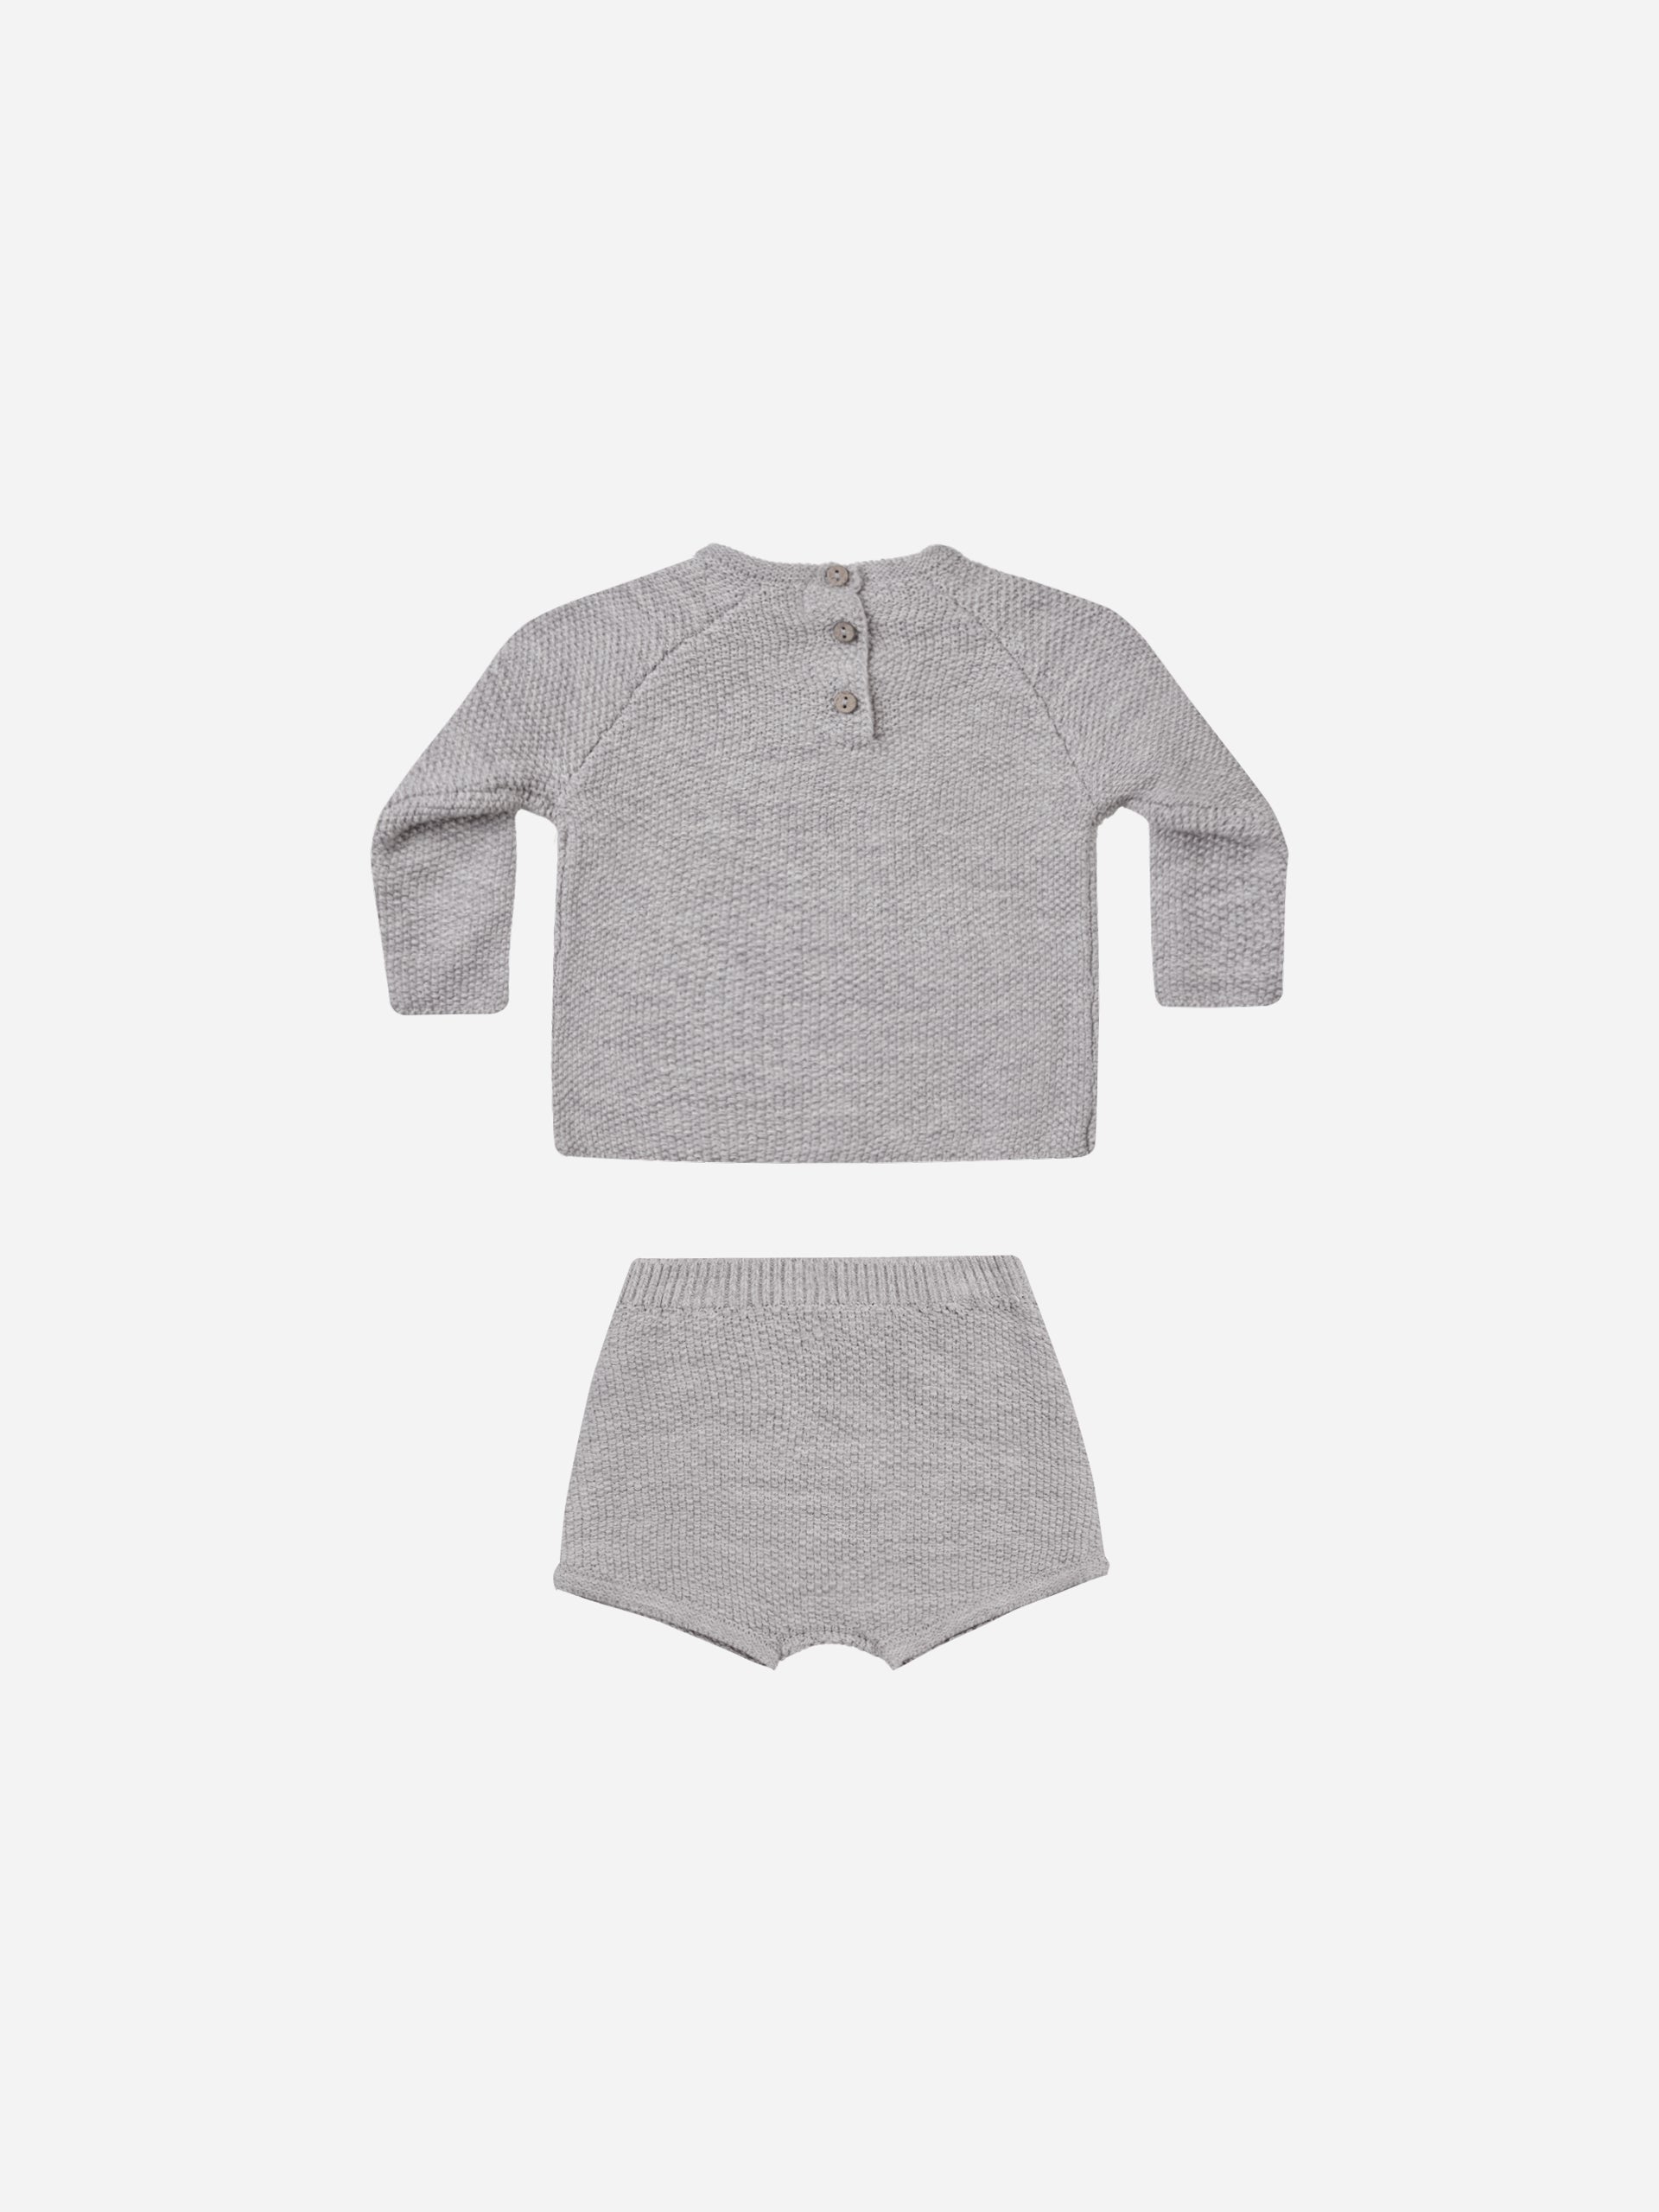 Summer Knit Set || Heathered Periwinkle - Rylee + Cru | Kids Clothes | Trendy Baby Clothes | Modern Infant Outfits |